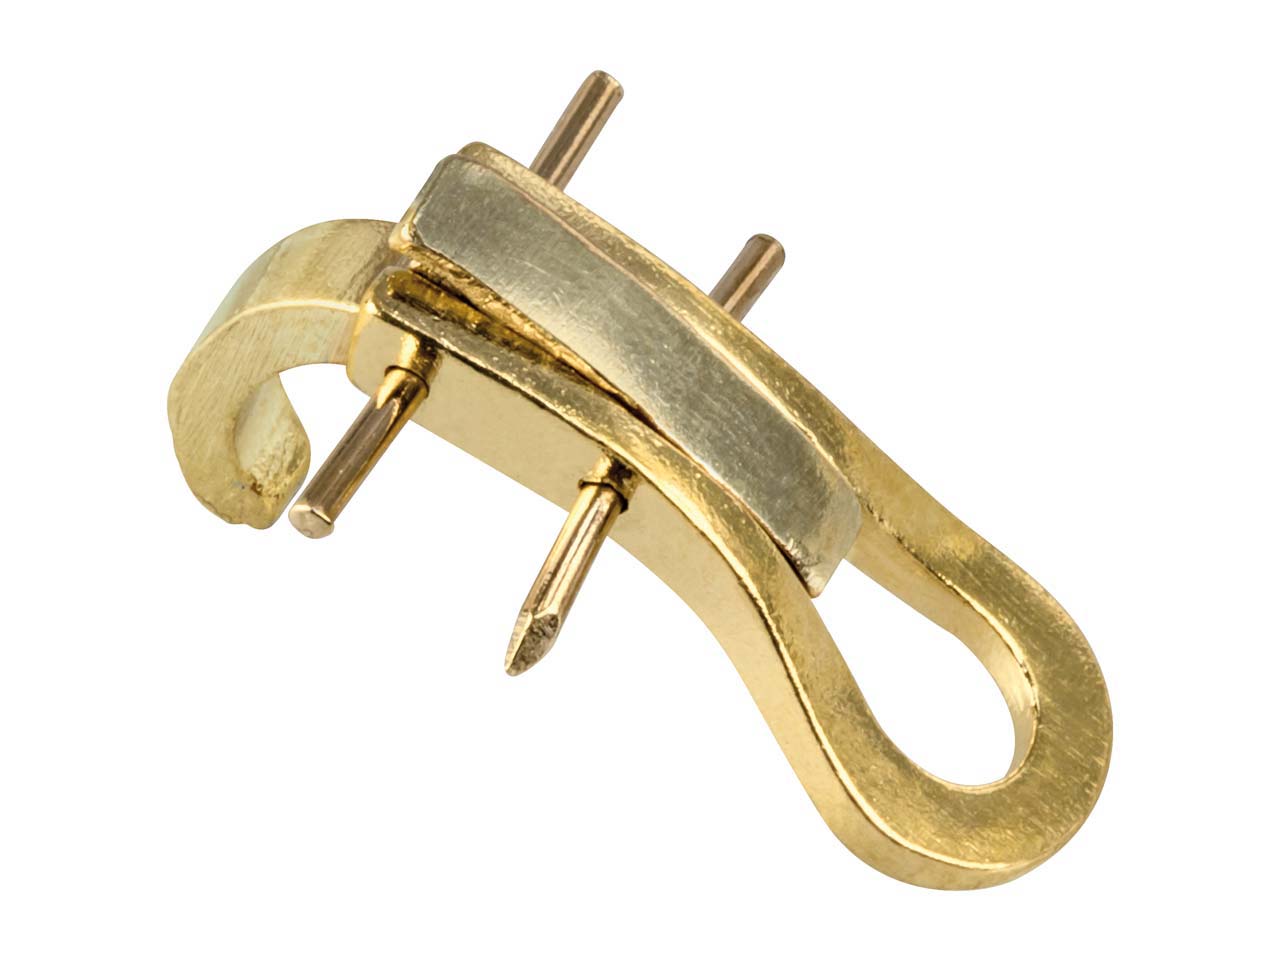 From which part of the 18ct Yellow Gold Ear Clip does the 14mm measurement start?